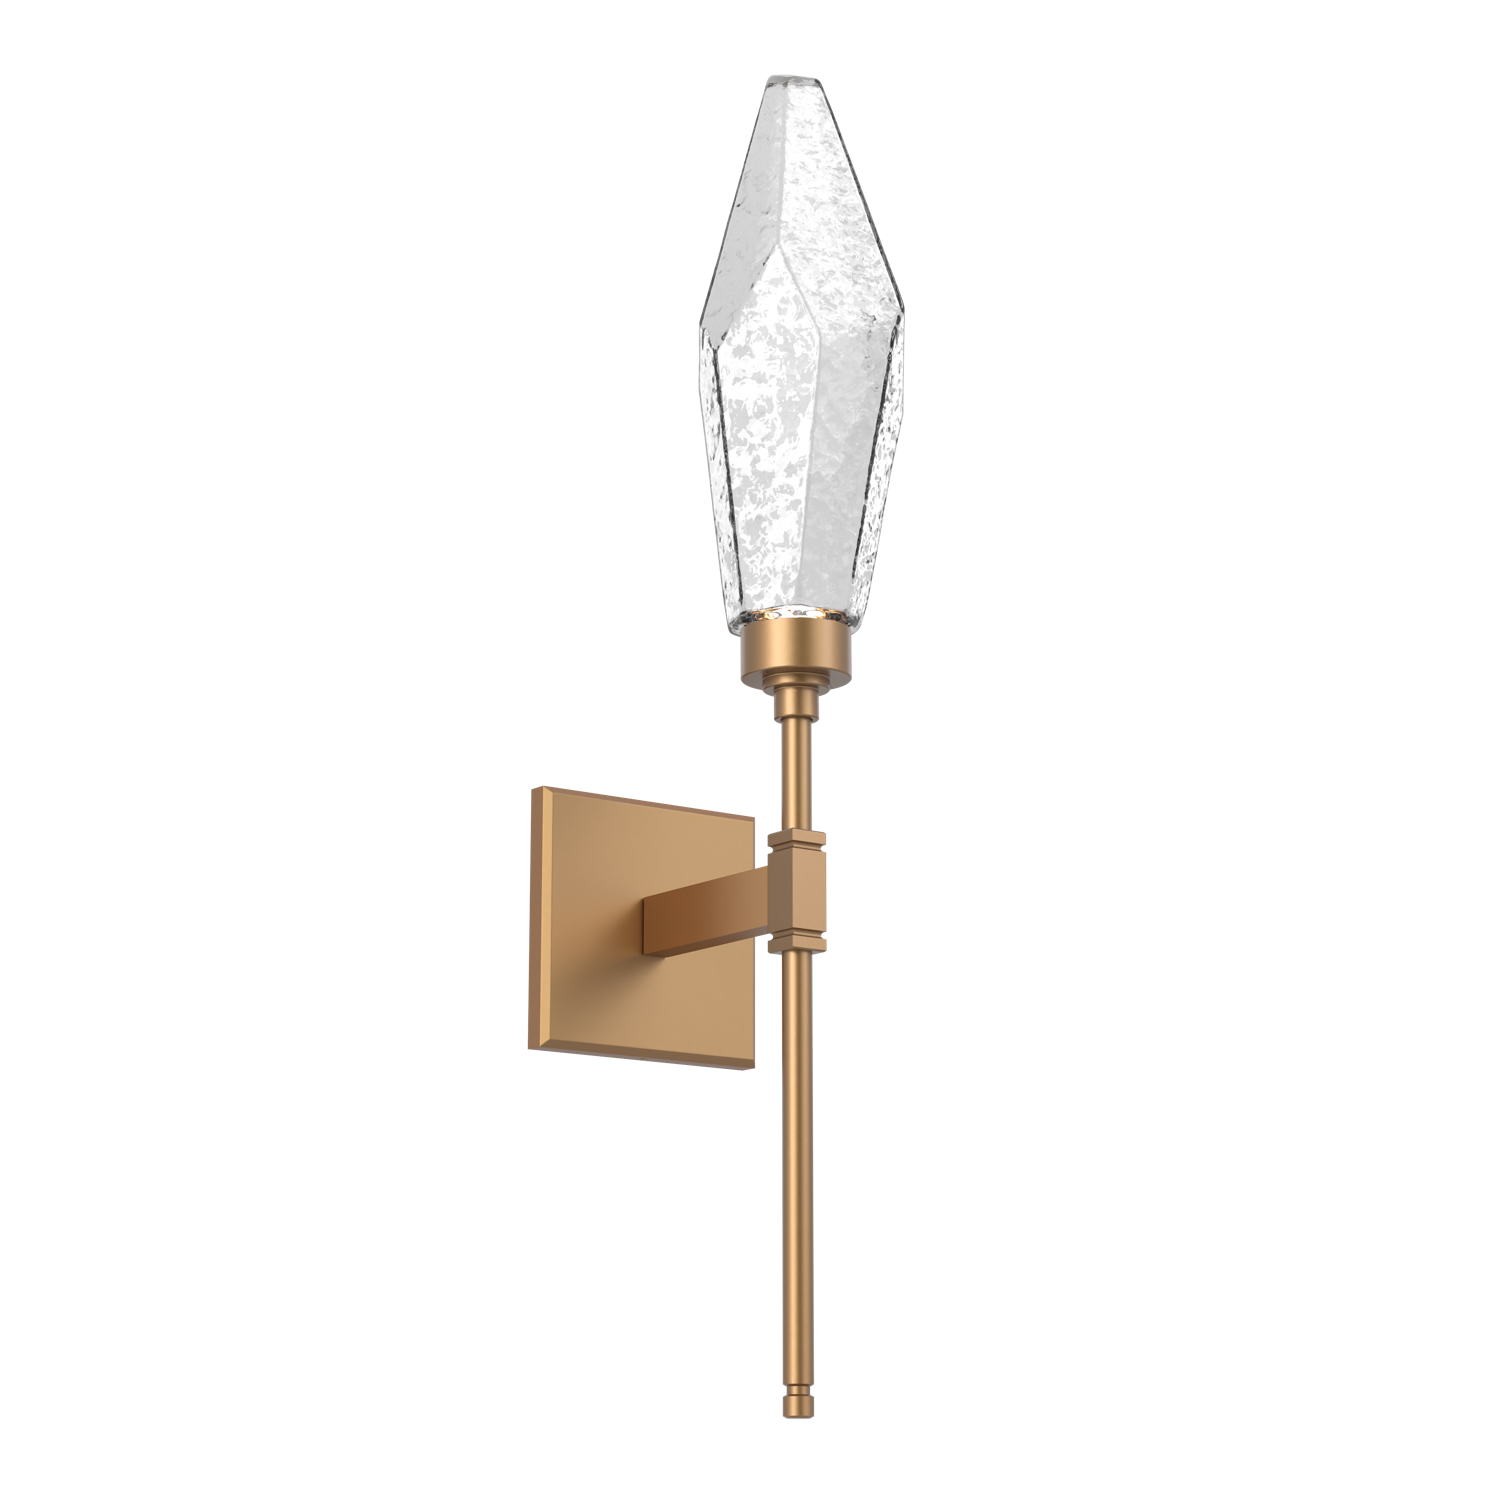 IDB0050-07-NB-CC-Hammerton-Studio-Rock-Crystal-belvedere-wall-sconce-with-novel-brass-finish-and-clear-glass-shades-and-LED-lamping